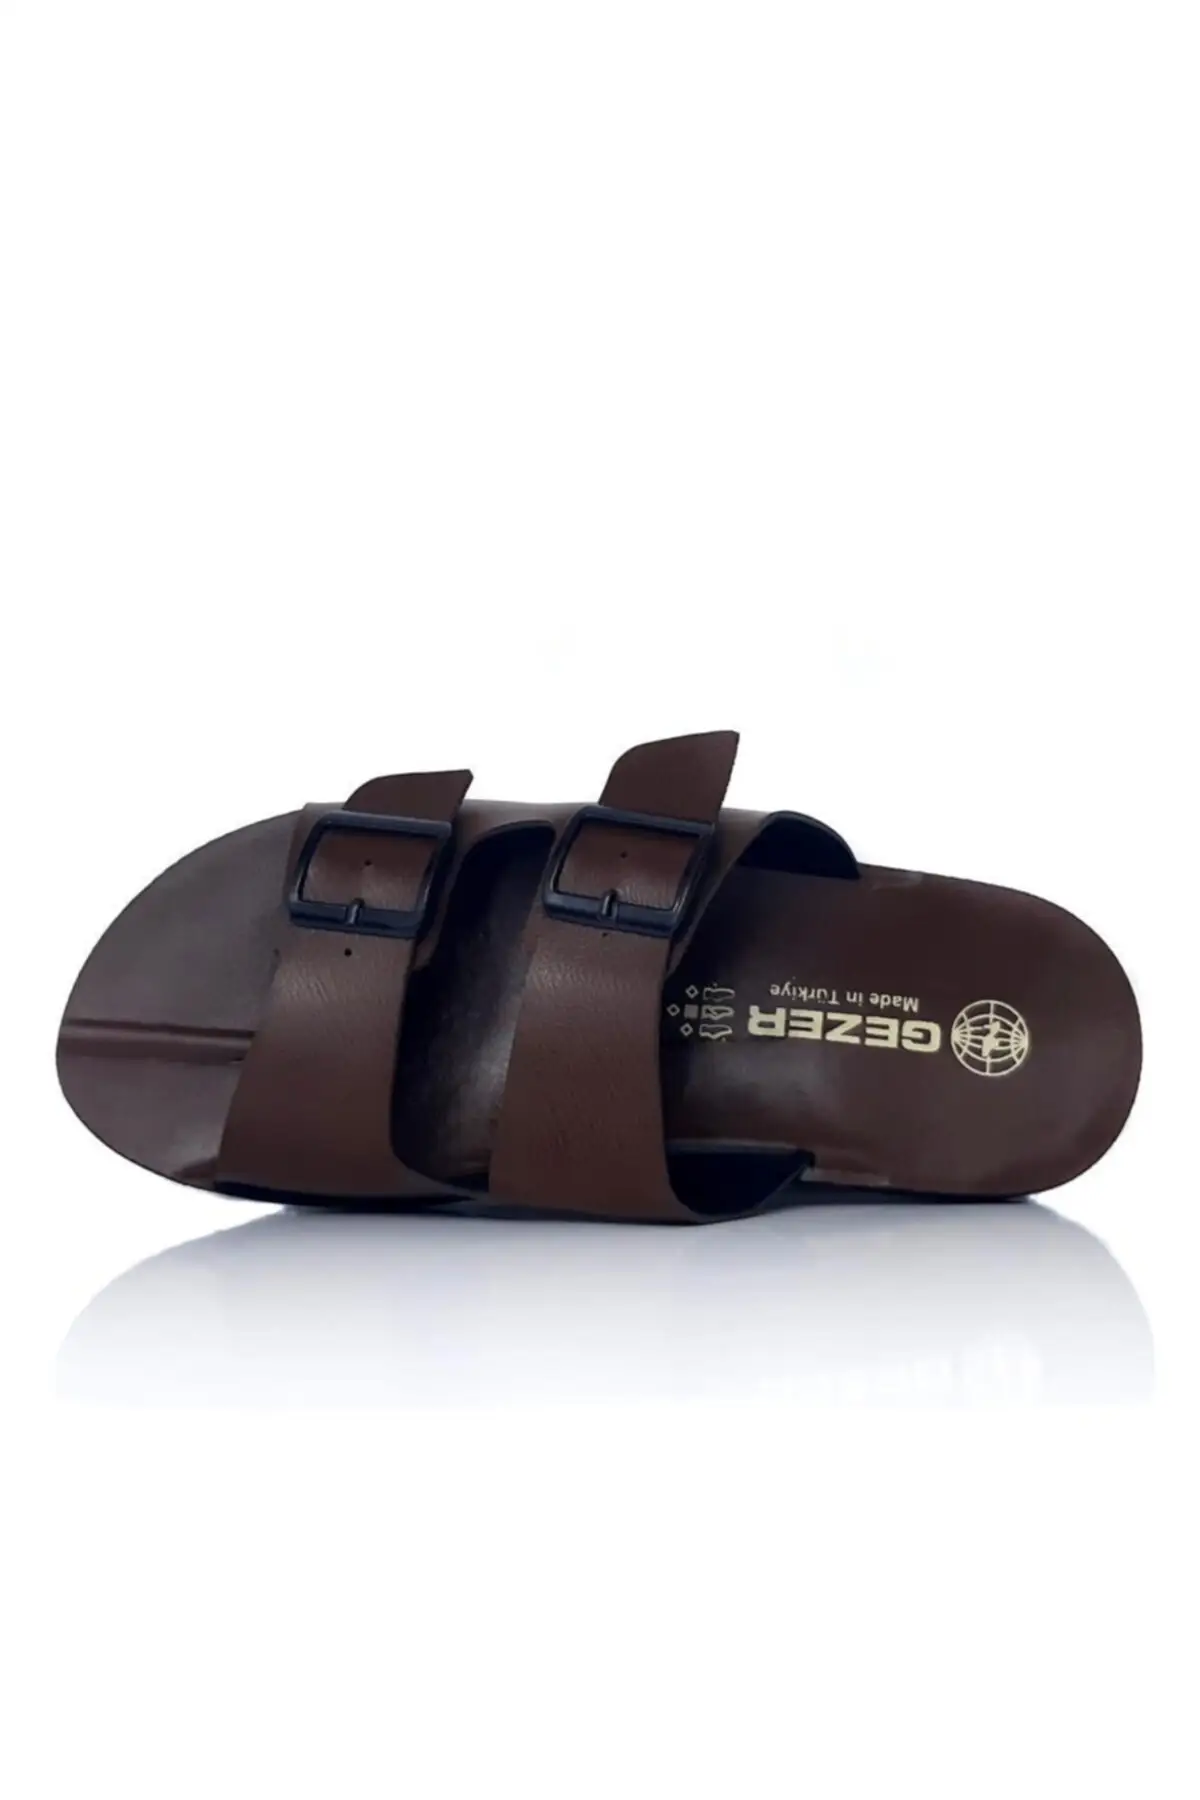 

SERESSTORE Gezer 12972 Buckled Men's Slippers Home and out Slippers